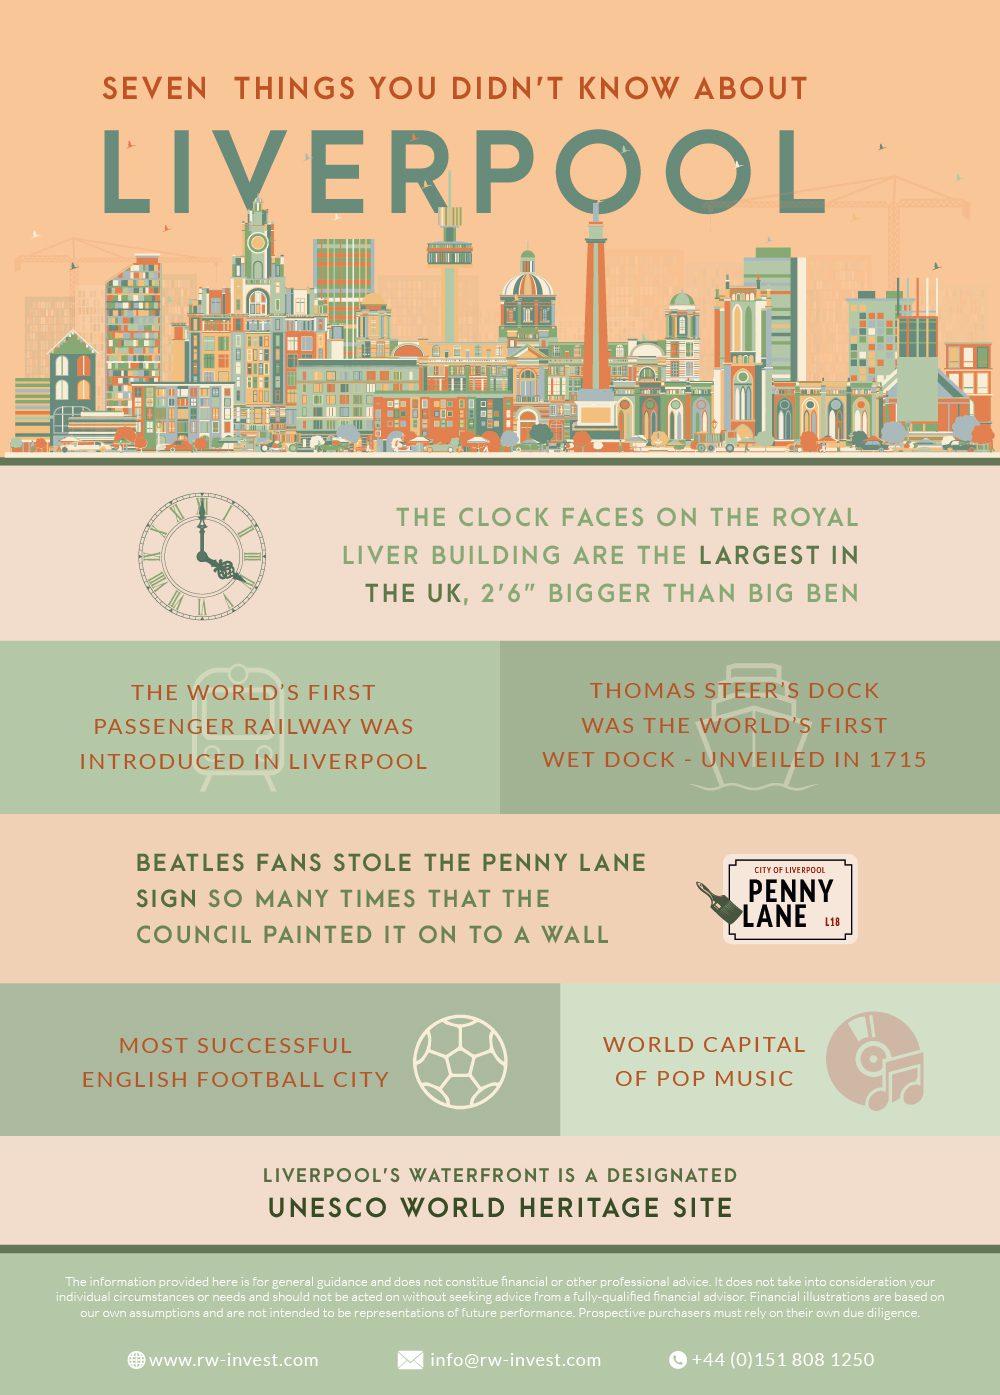 Seven Things You Didn’t Know About Liverpool infographic